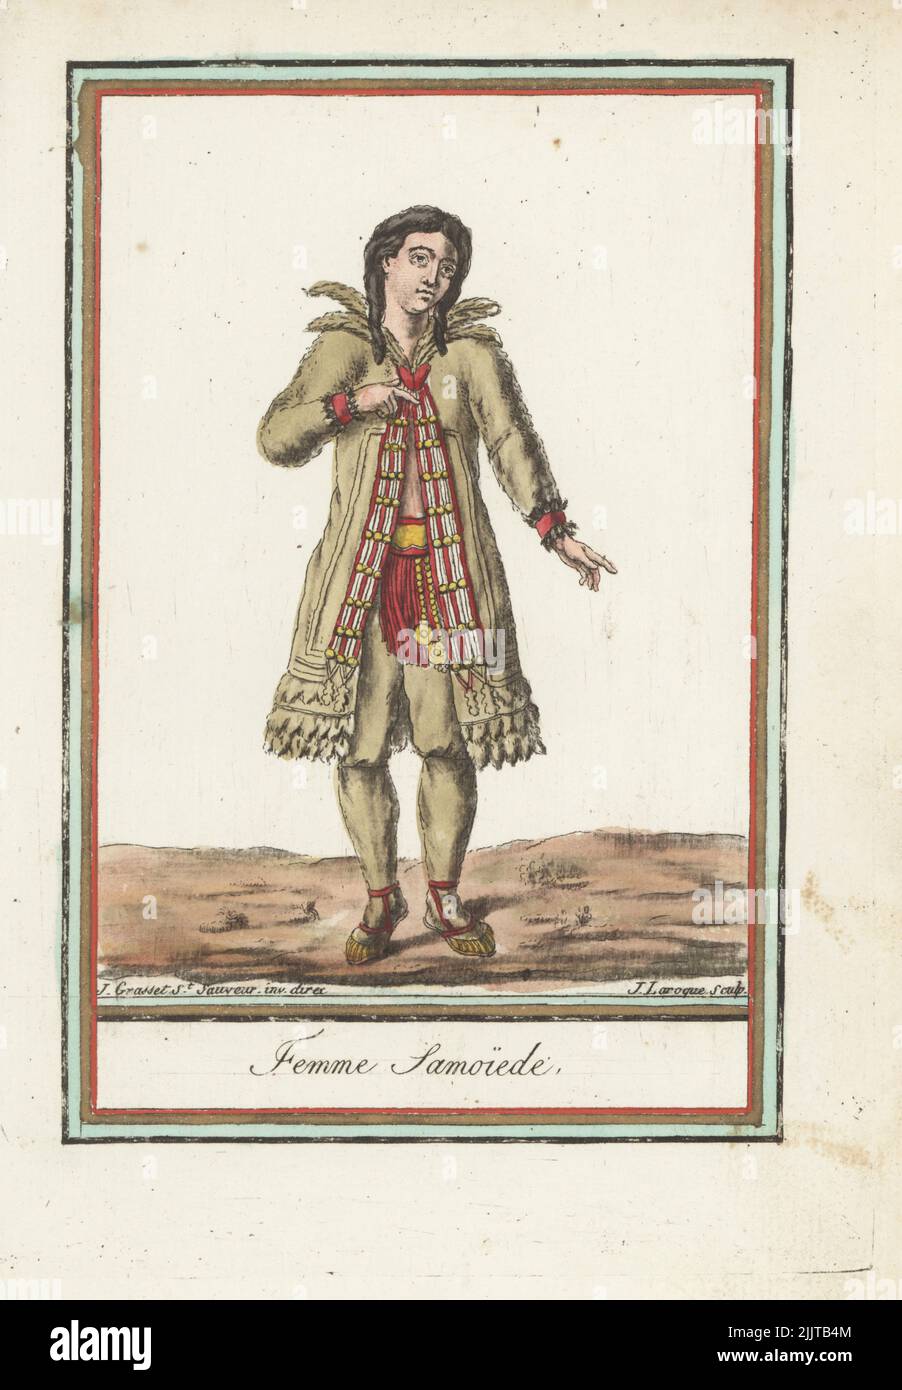 Samoyedic woman of Siberia: Nenets, Enets, Nganasans or Selkups people. In fur-lined parka or hooded coat and leggings made of animal skins (dog, fox, reindeer and wolf) decorated with embroidery, undershirt, fringed belt, bootlets. Femme Samoyede. Handcoloured copperplate engraving by J. Laroque after a design by Jacques Grasset de Saint-Sauveur from his Encyclopedie des voyages, Encyclopedia of Voyages, Bordeaux, France, 1792. Stock Photo